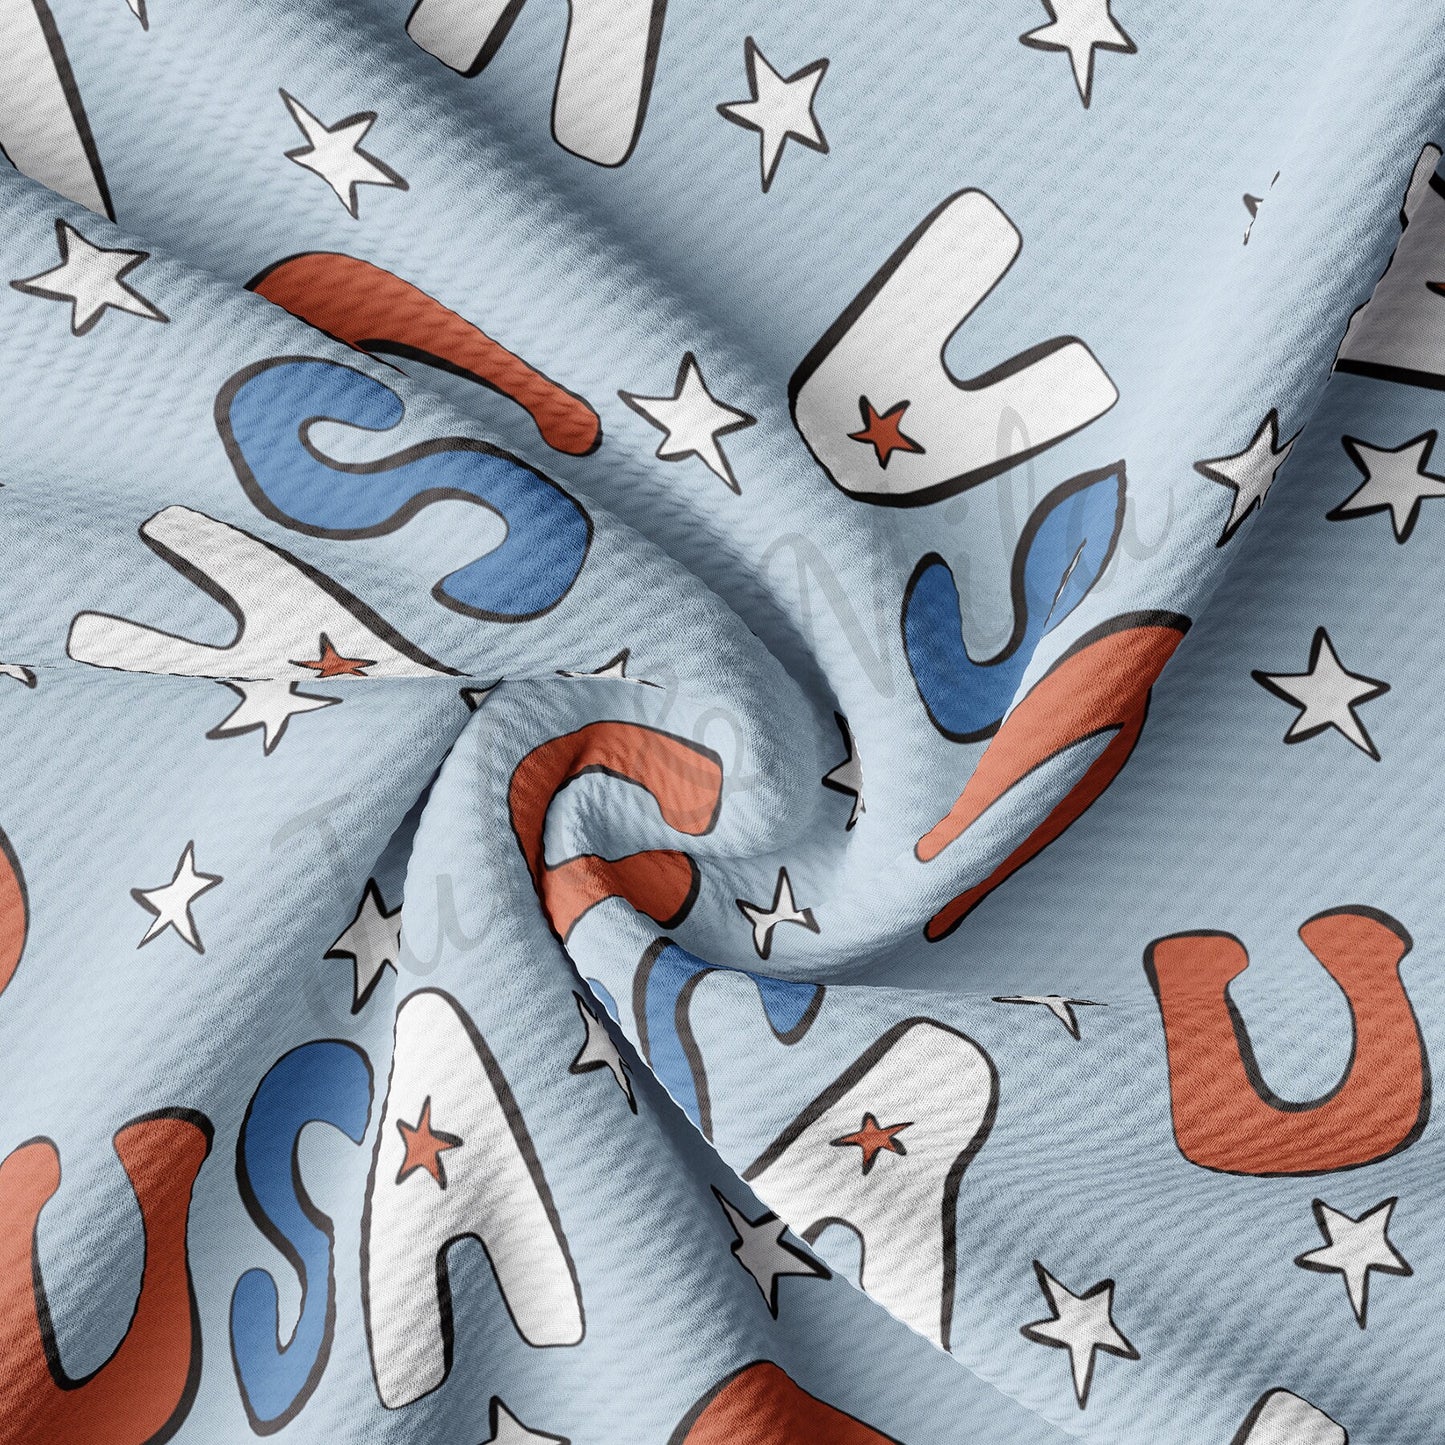 Patriotic 4th of July Bullet Textured Fabric AA1228